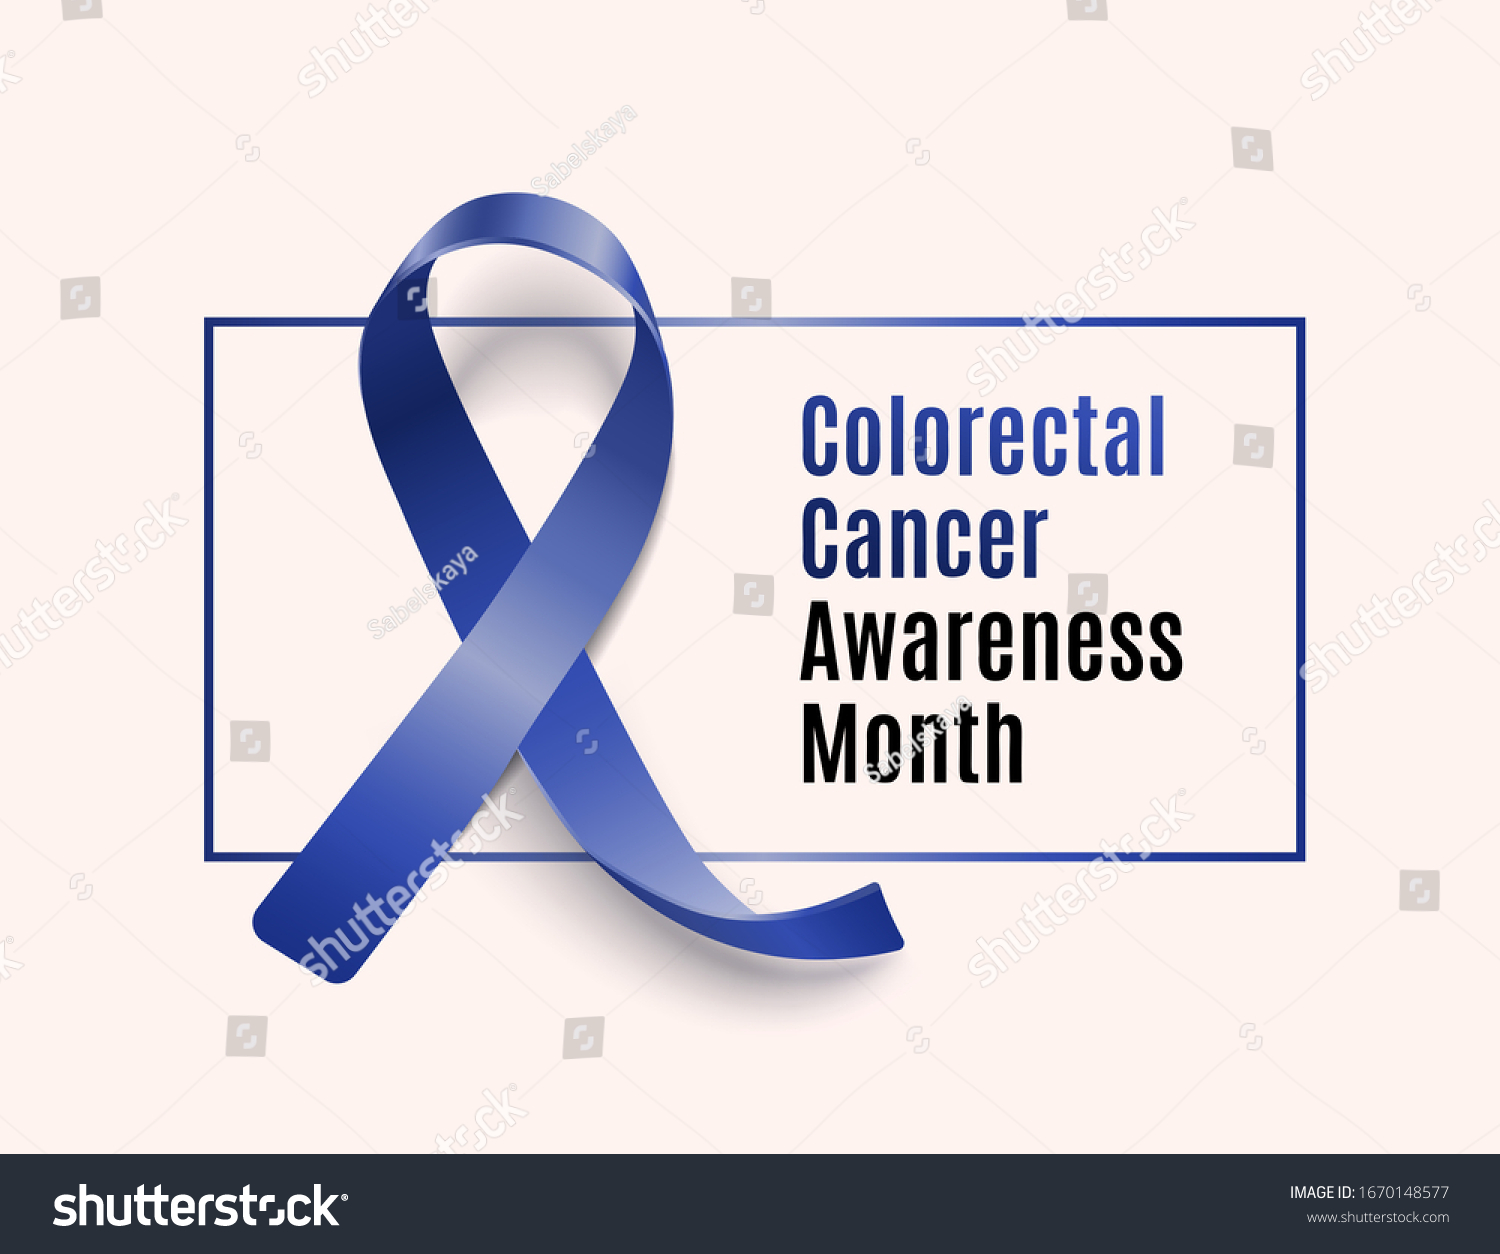 Stock Vector Colorectal Cancer Awareness Month Dark Blue Ribbon With Text On Disease Solidarity Card Banner 1670148577 